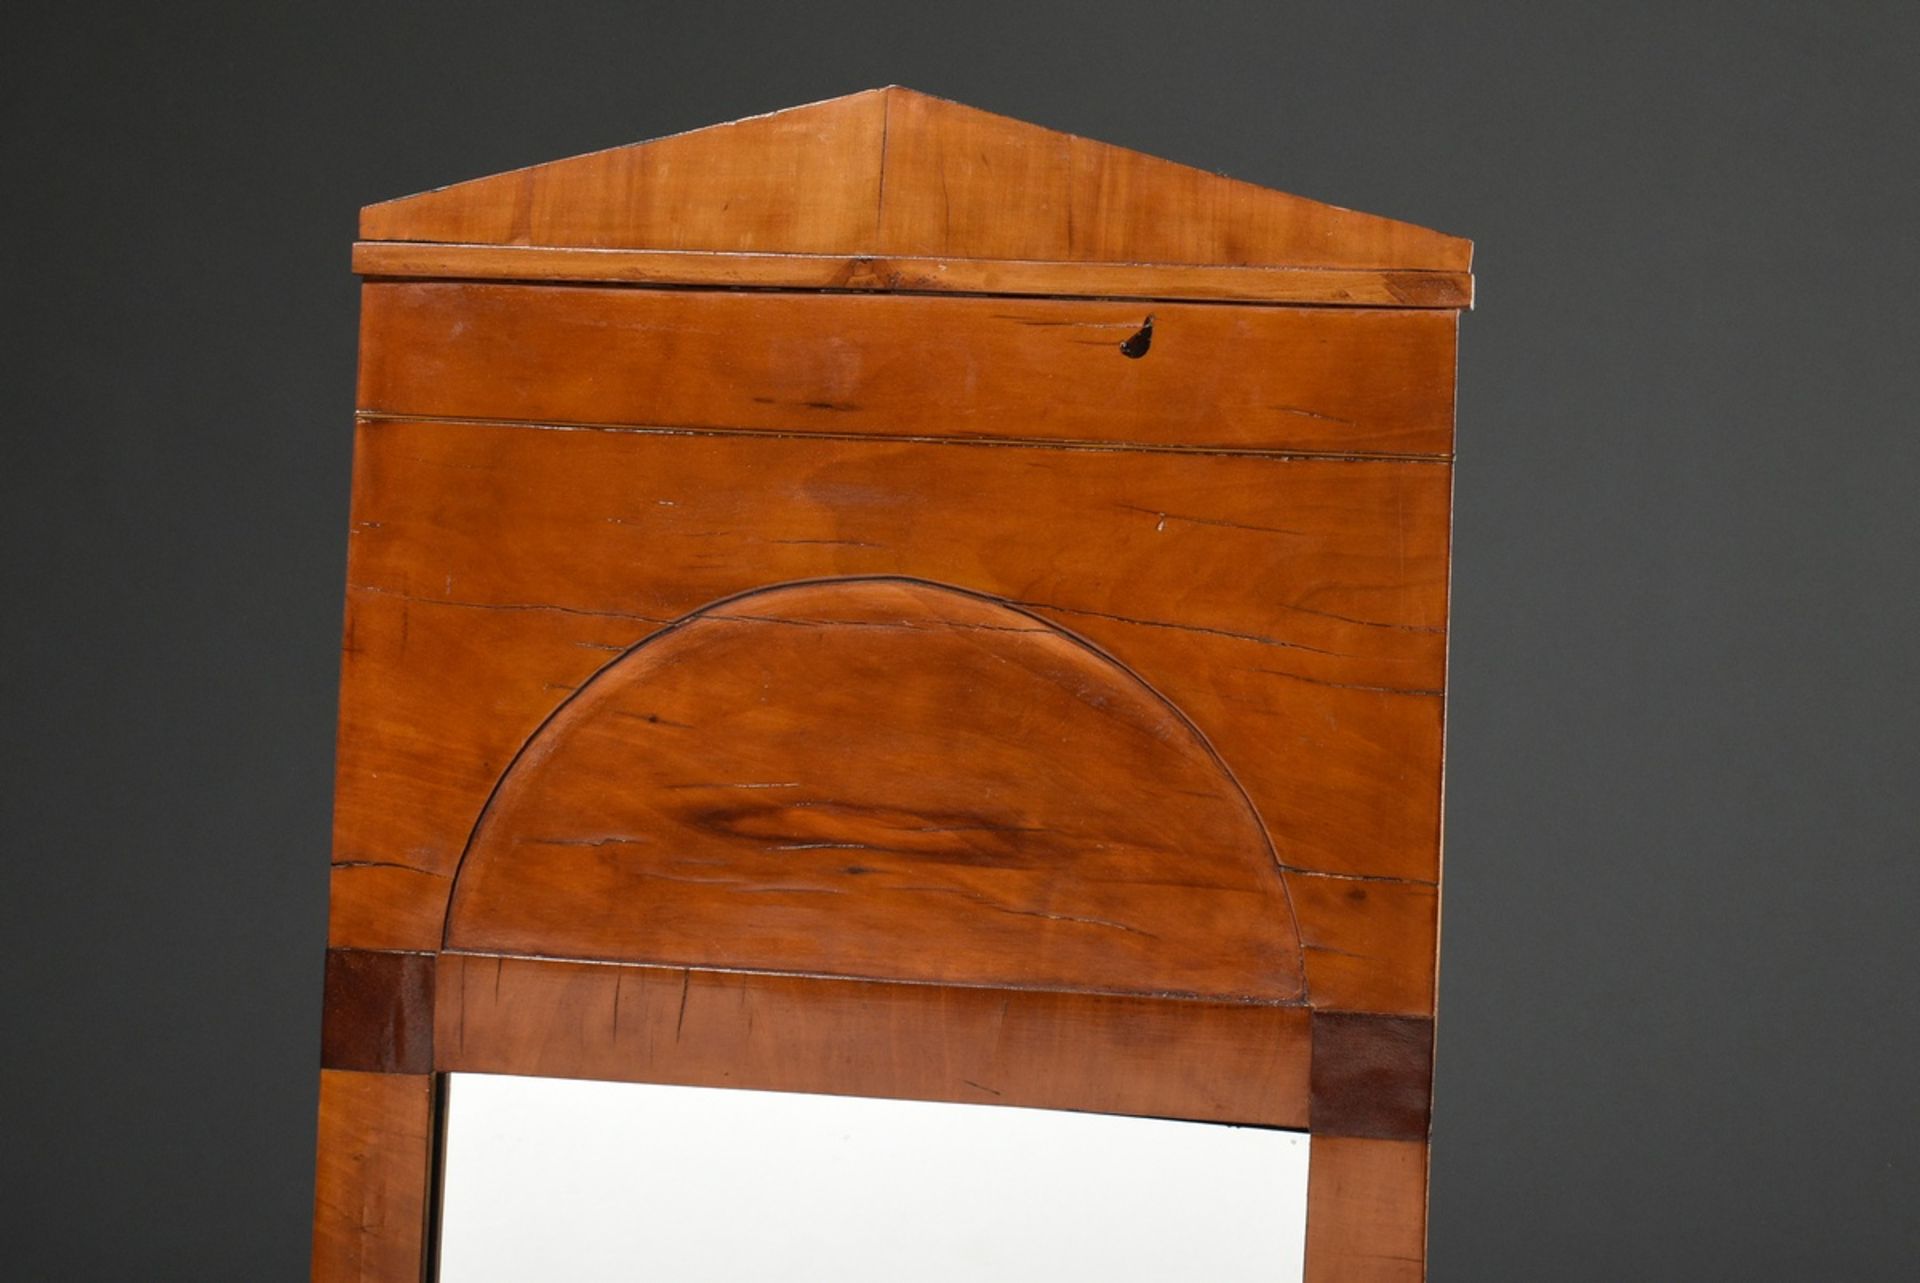 Biedermeier console mirror in simple façon with pointed gable, fruitwood, 19th century, 103x38cm, s - Image 2 of 3